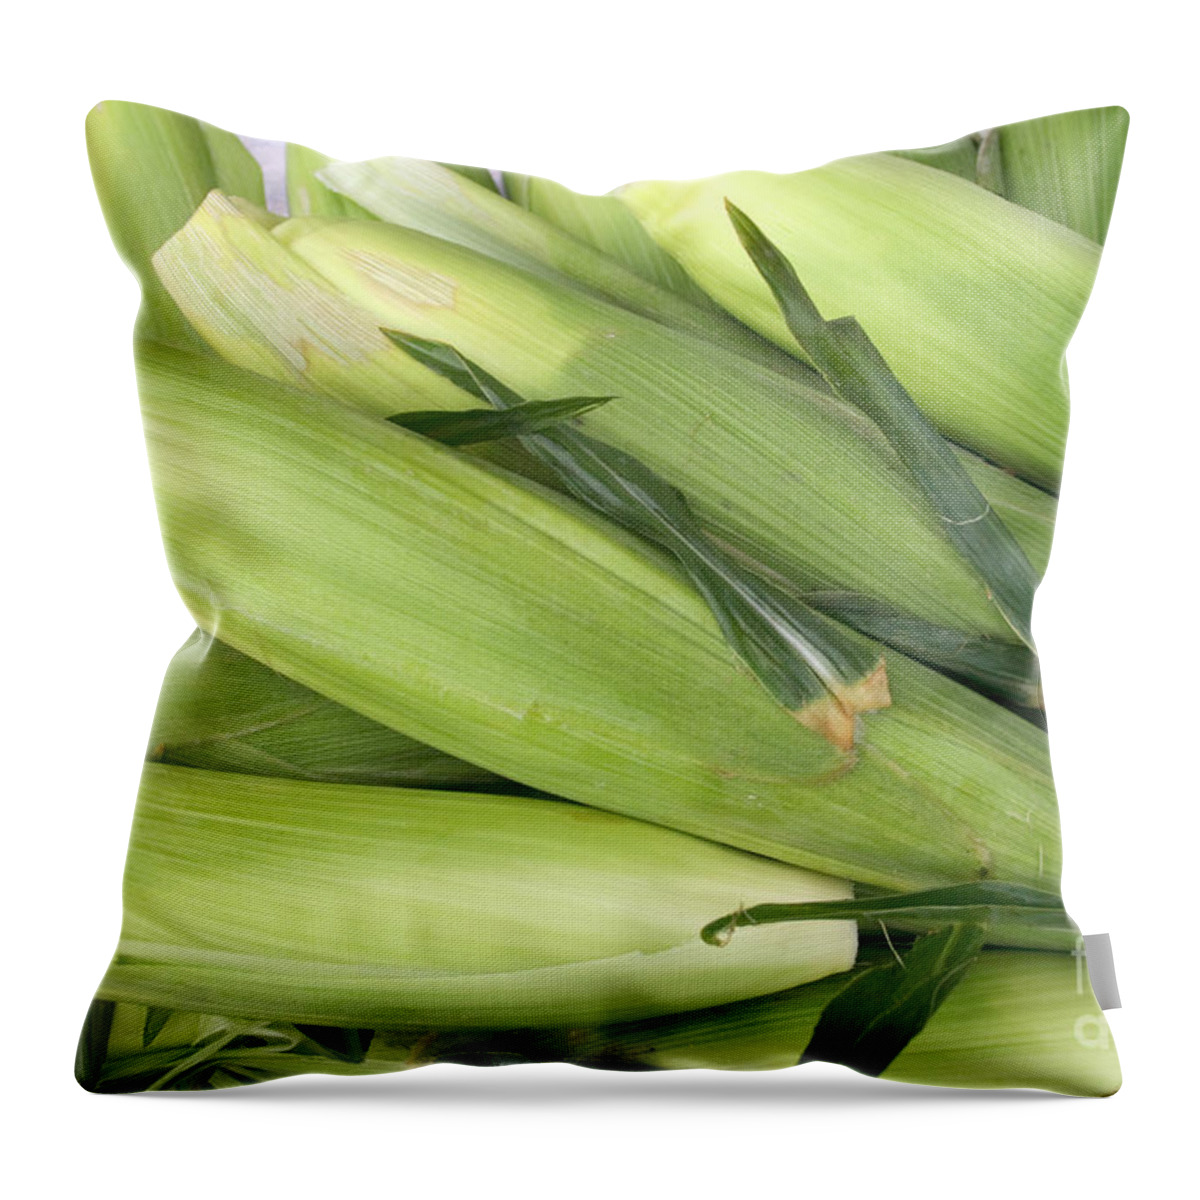 Corn Throw Pillow featuring the photograph Bunch of corn in husk by James BO Insogna